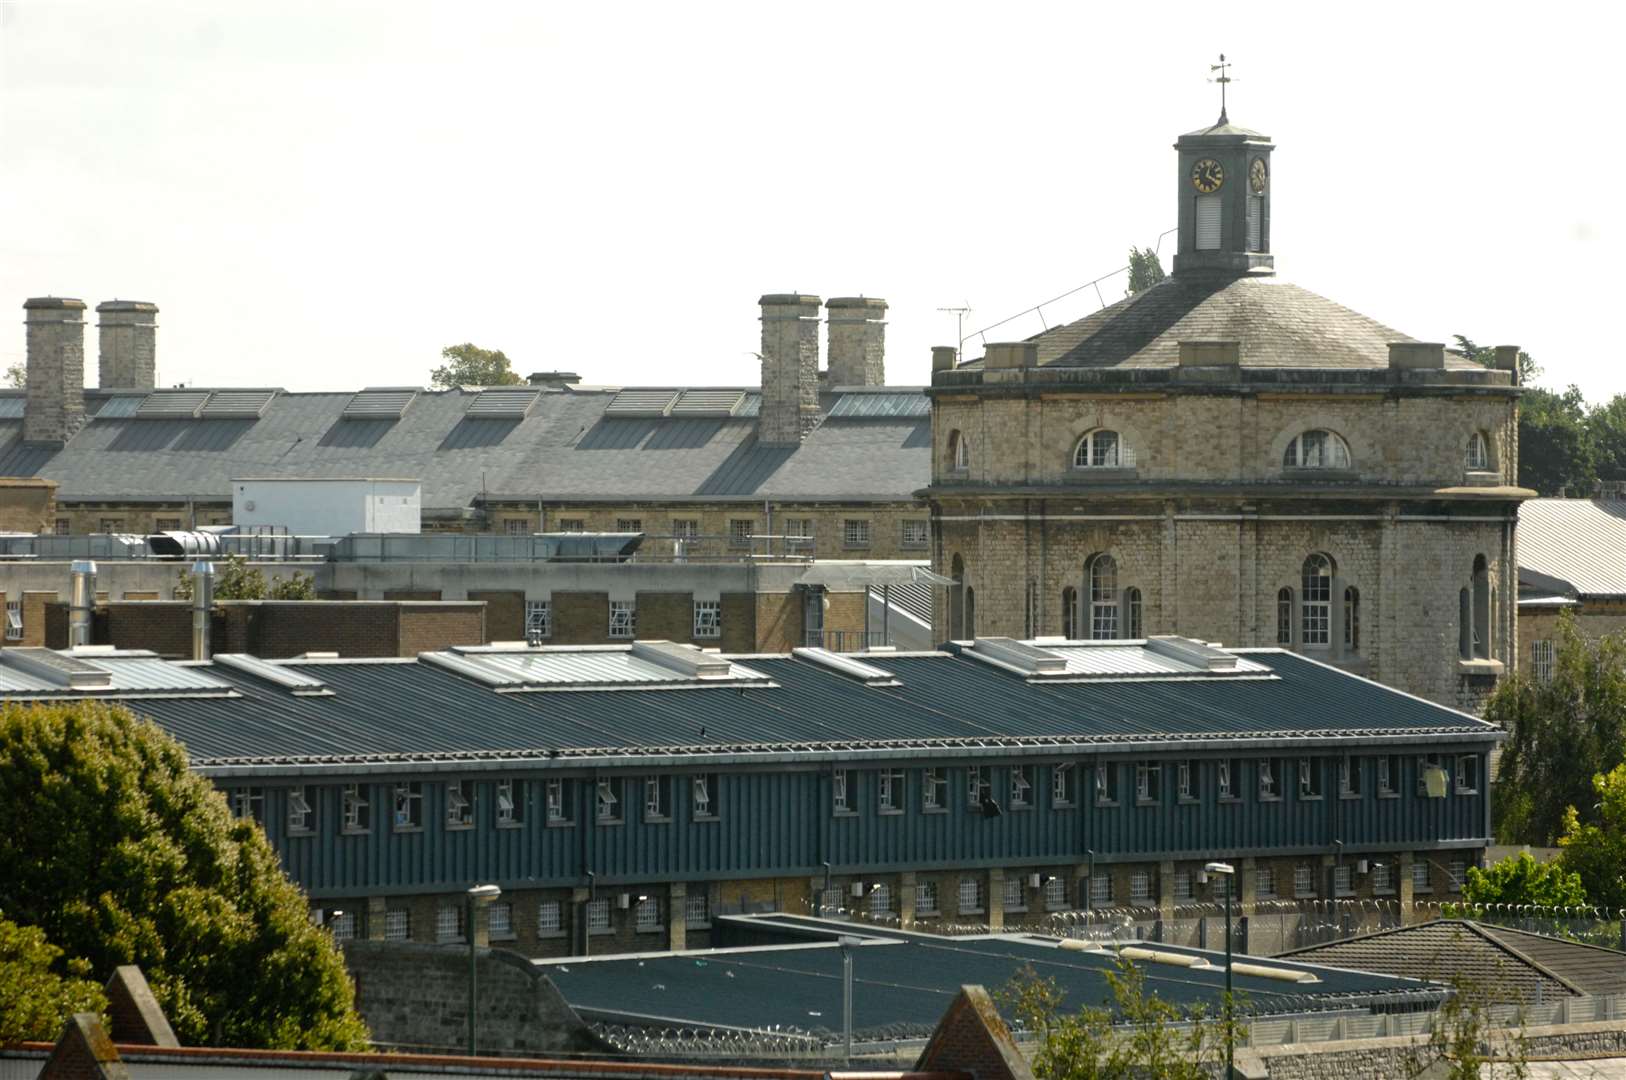 Inmates at Maidstone prison have been in their cells for 23 hours a day during lockdown